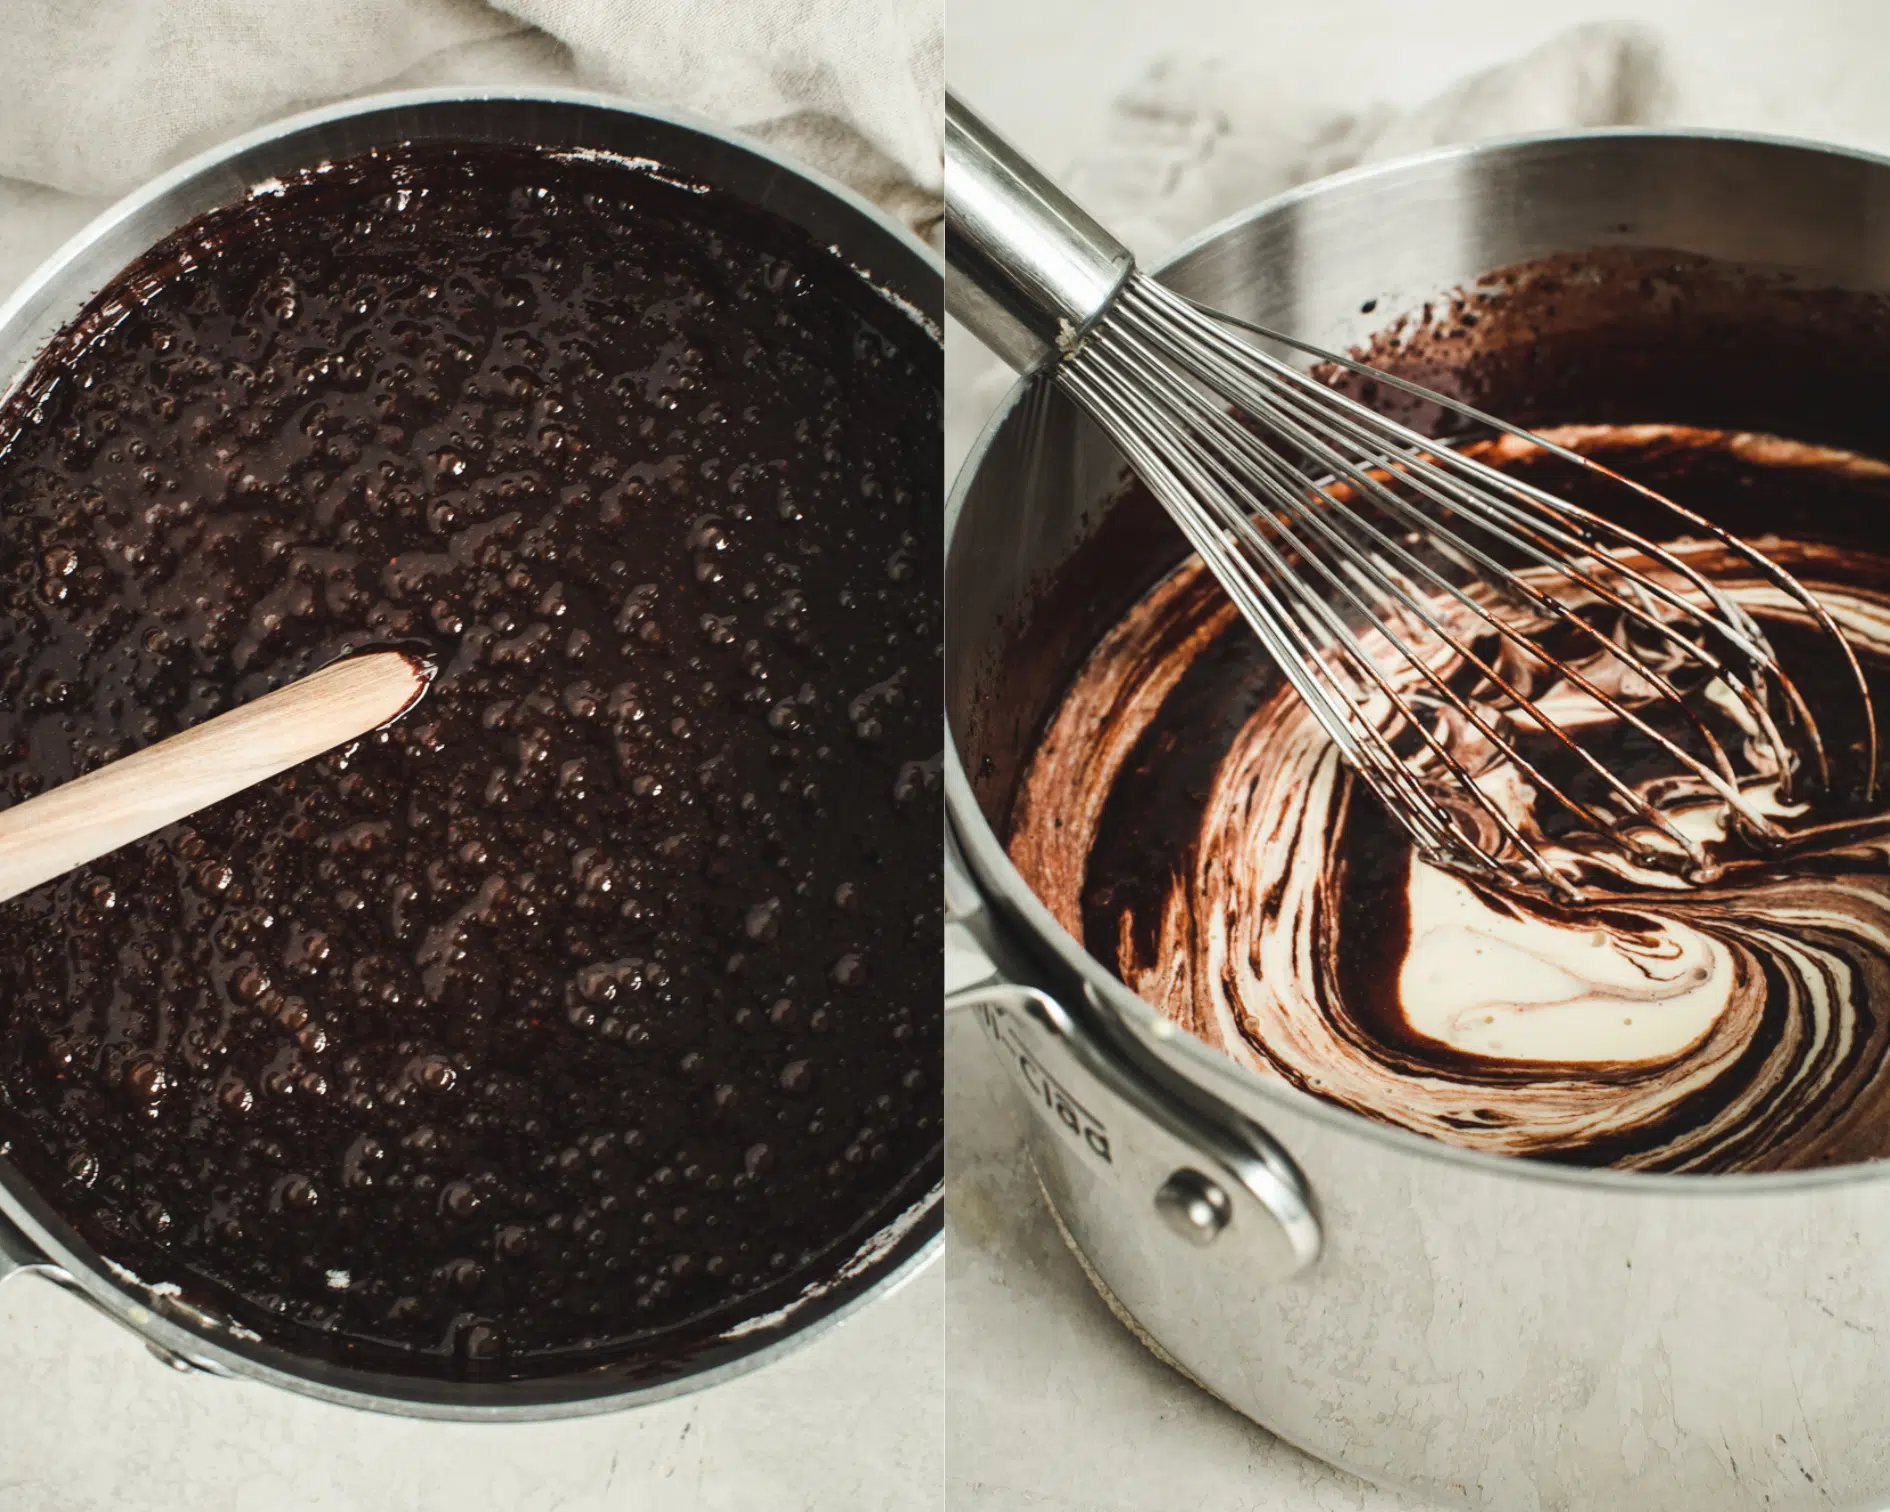 Guiness cake batter in a saucepan on left and chocolate ganache mixture in saucepan on right.